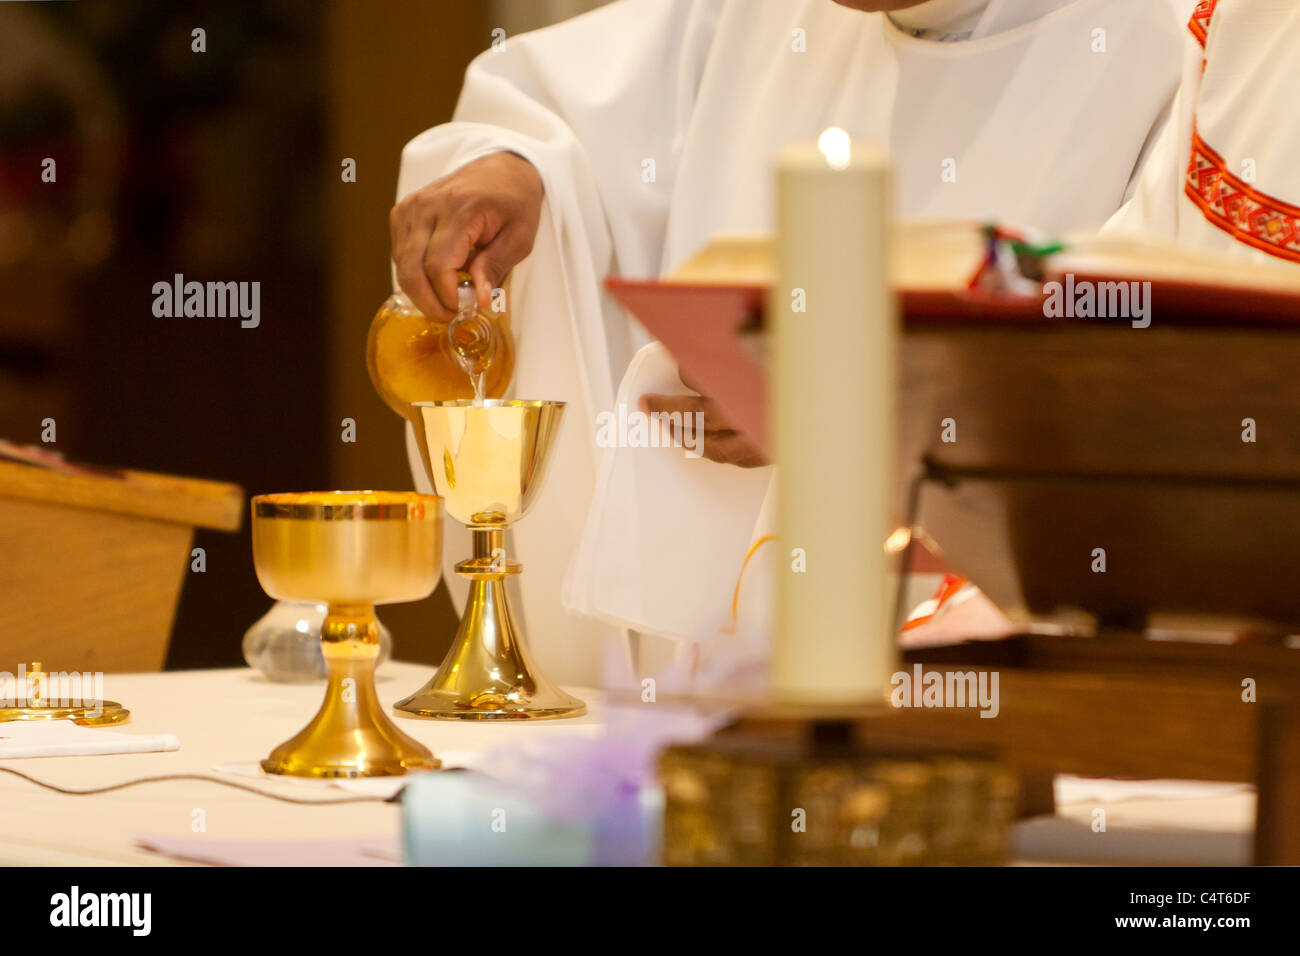 Catholic Mass and a priest holding a chalice during the religious ceremony. Stock Photo